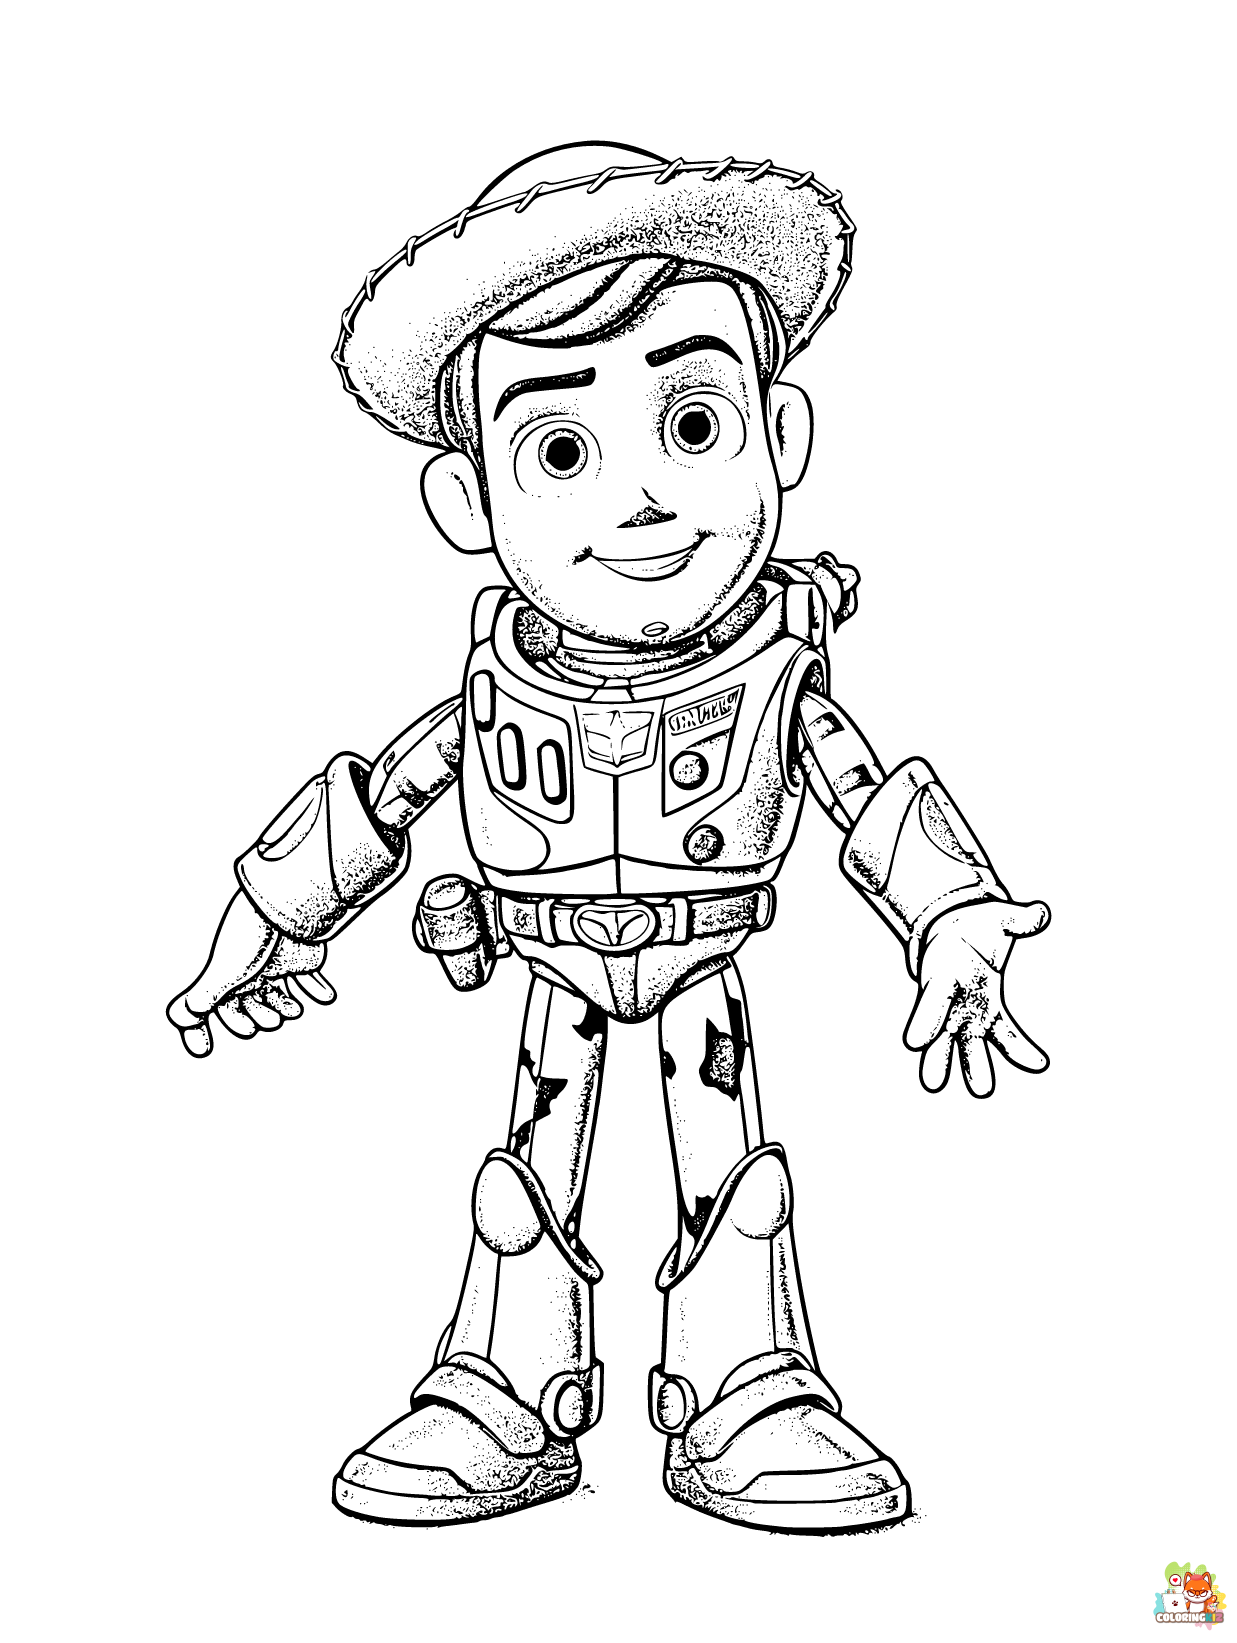 Toy Story coloring pages printable free